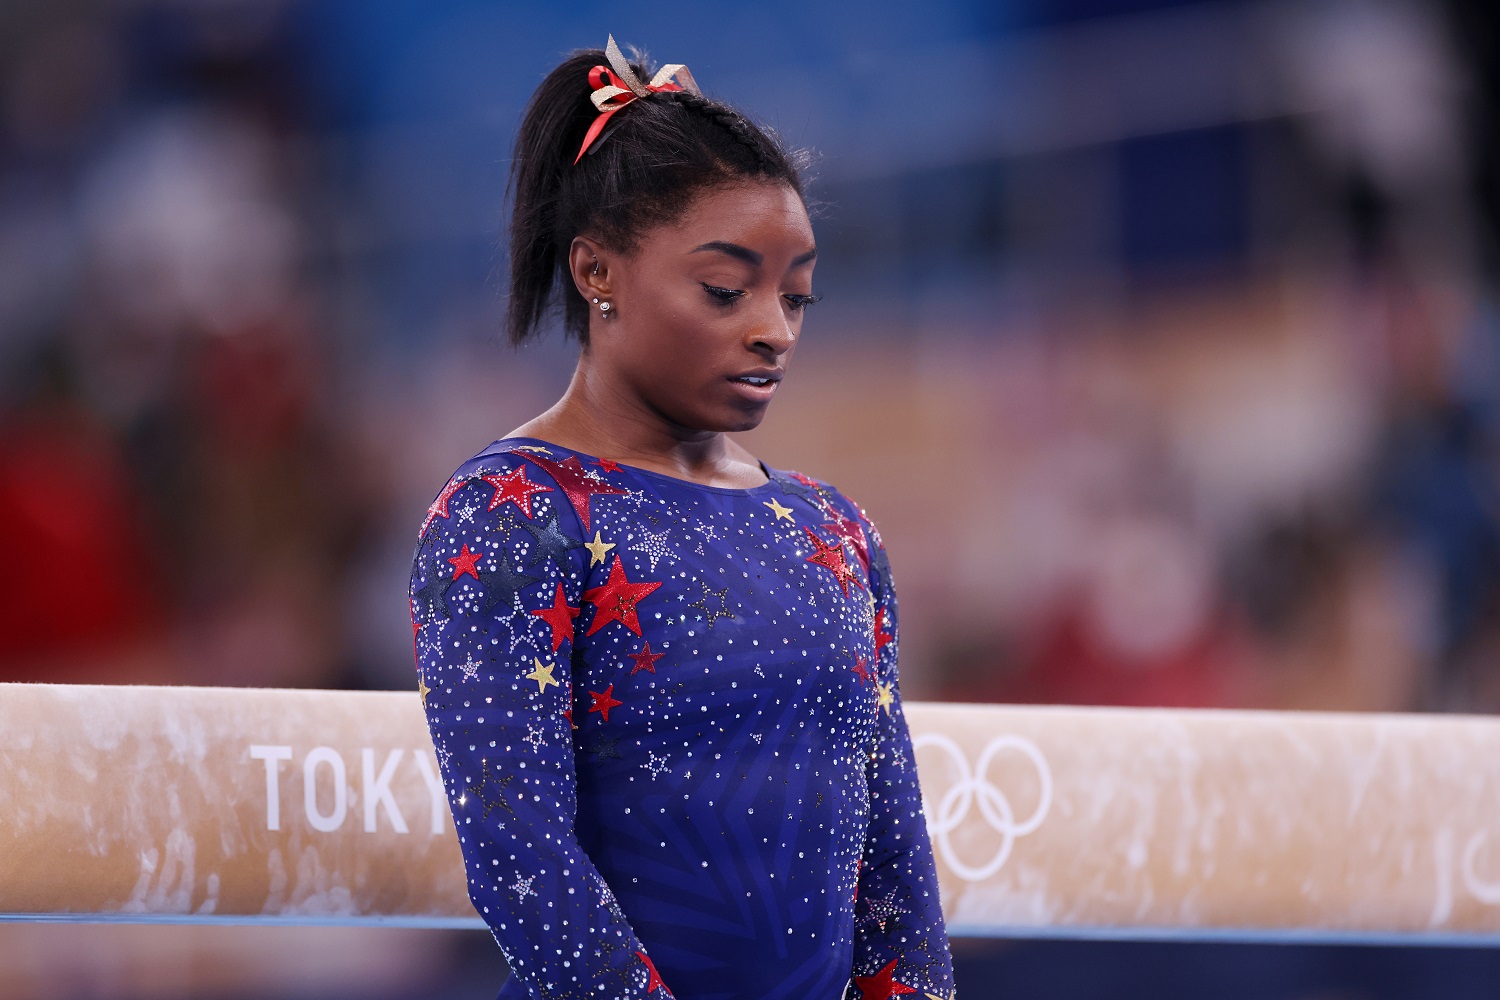 Simone Biles looks on during women's qualification on Day 2 of the Tokyo 2020 Olympic Games at Ariake Gymnastics Centre on July 25, 2021.